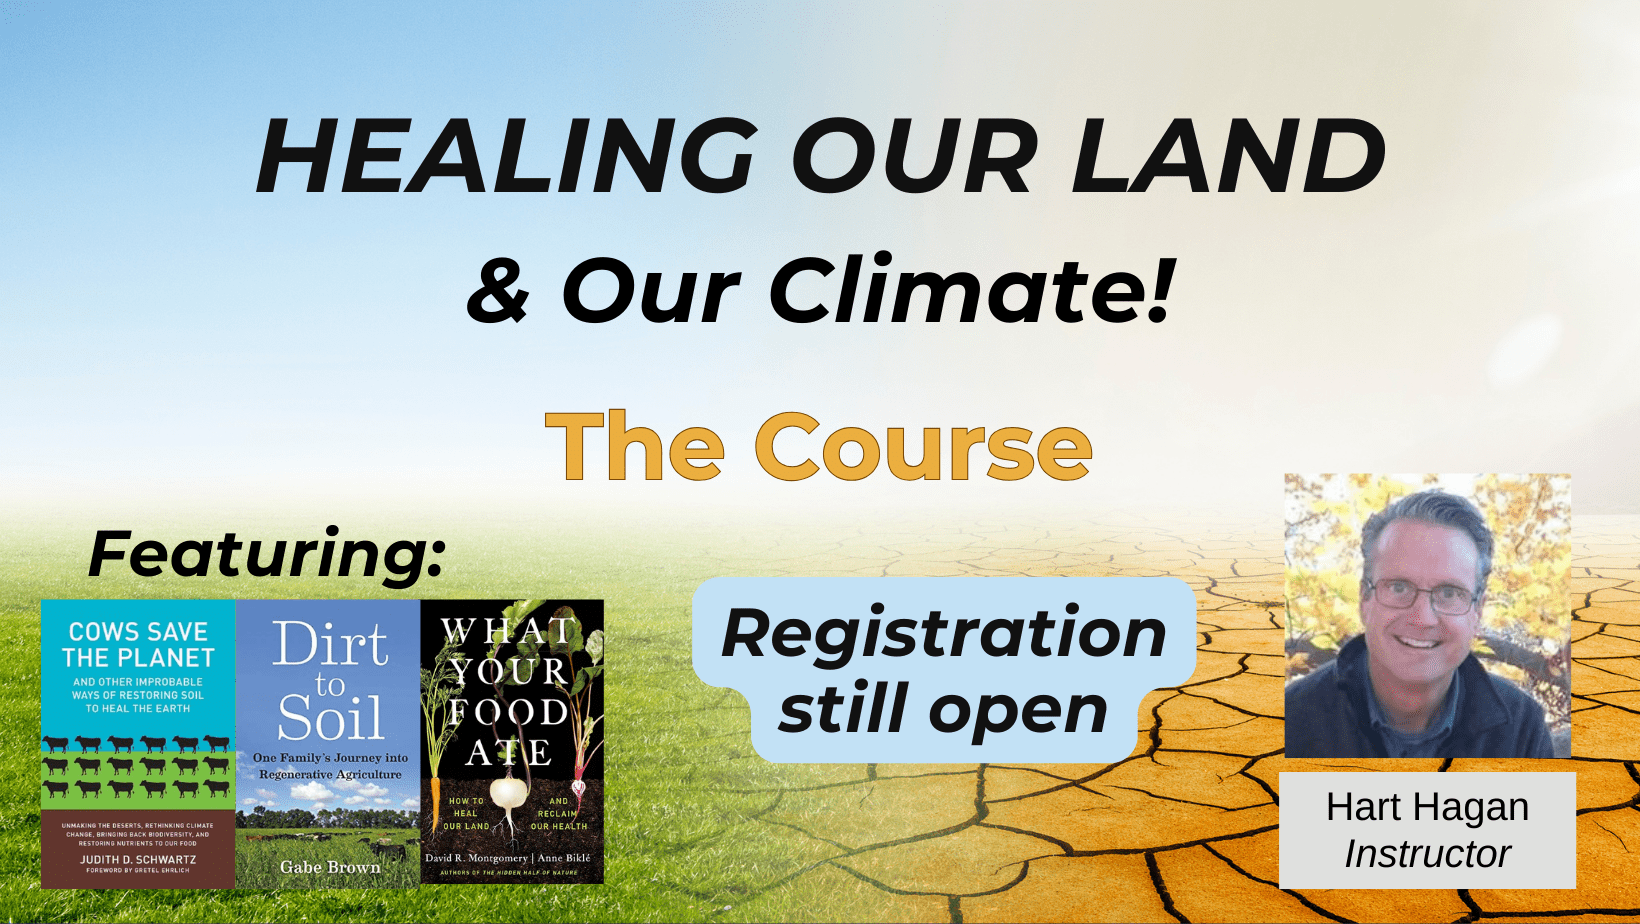 Healing Our Land & Our Climate! – Registration still open